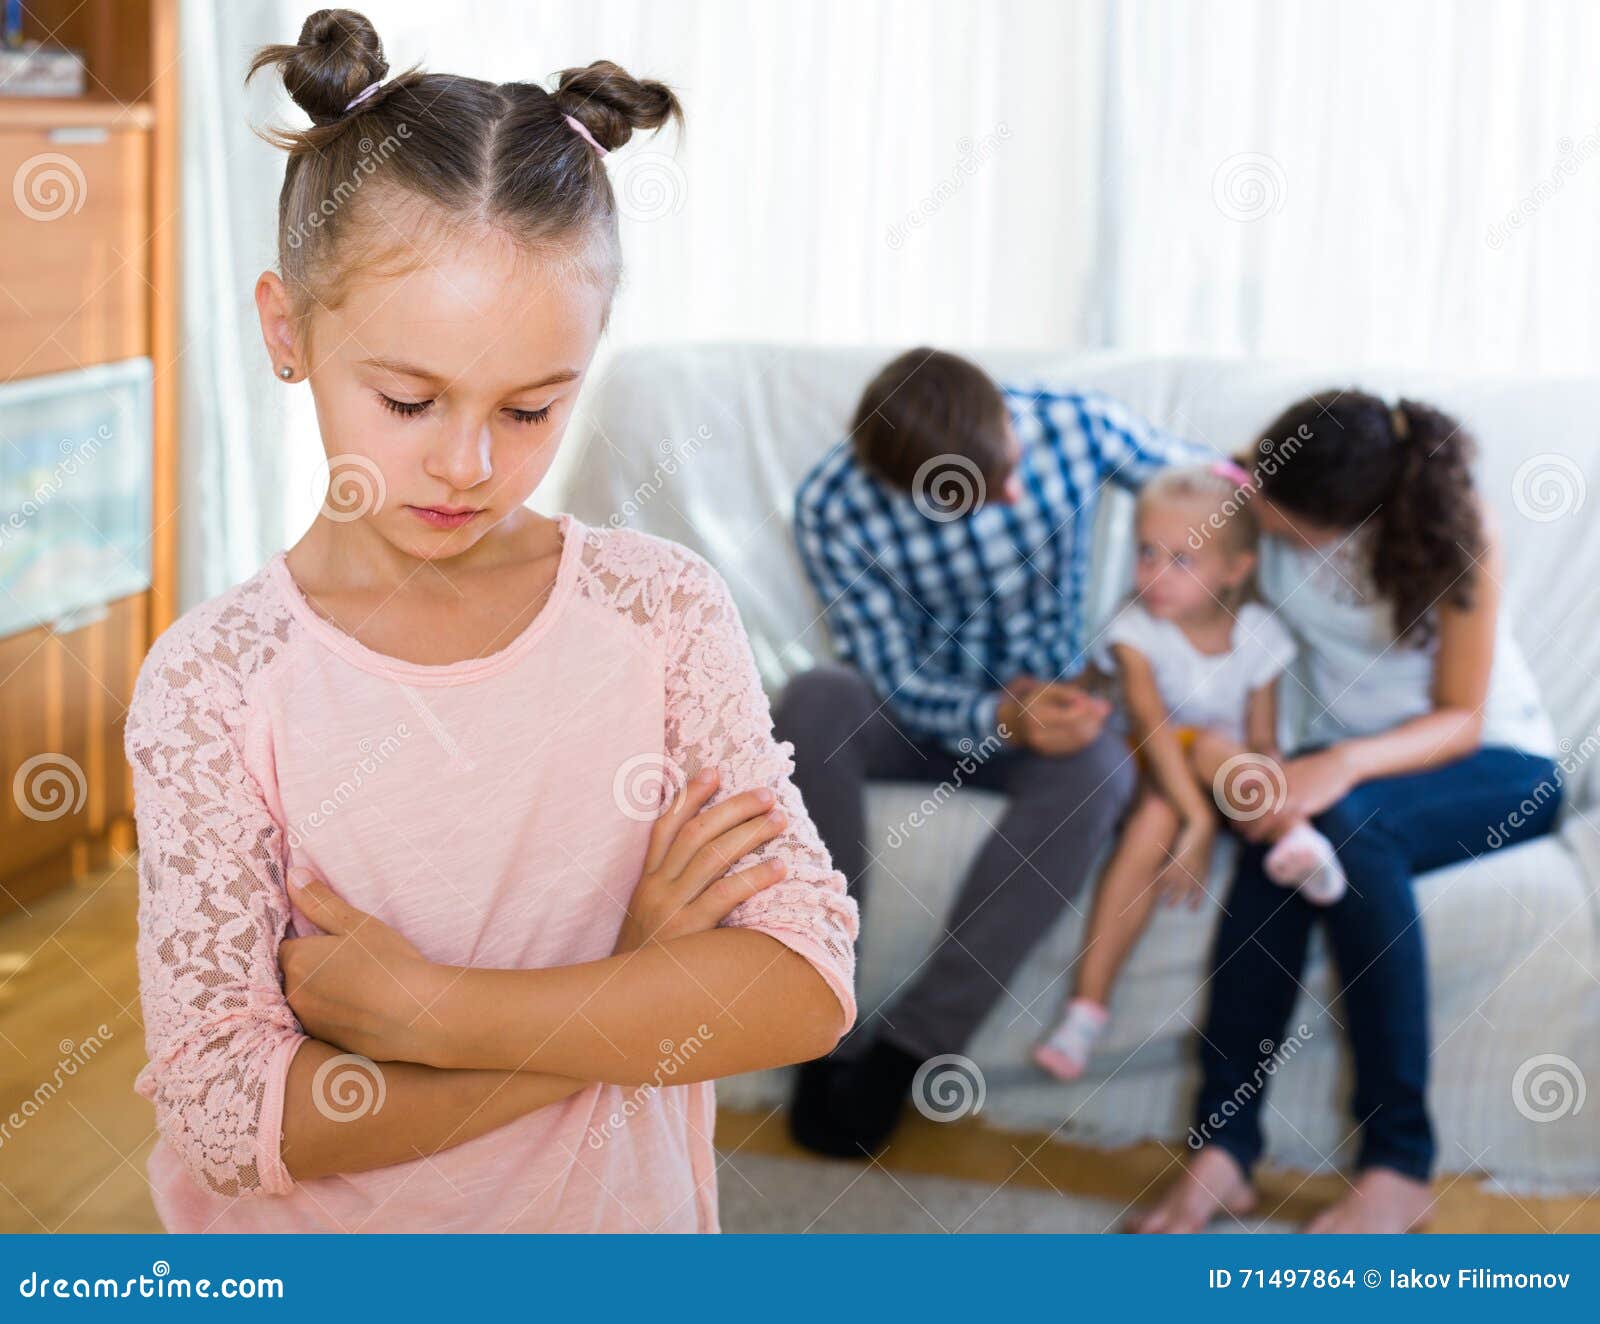 girl sad because of jealous younger sister to parents